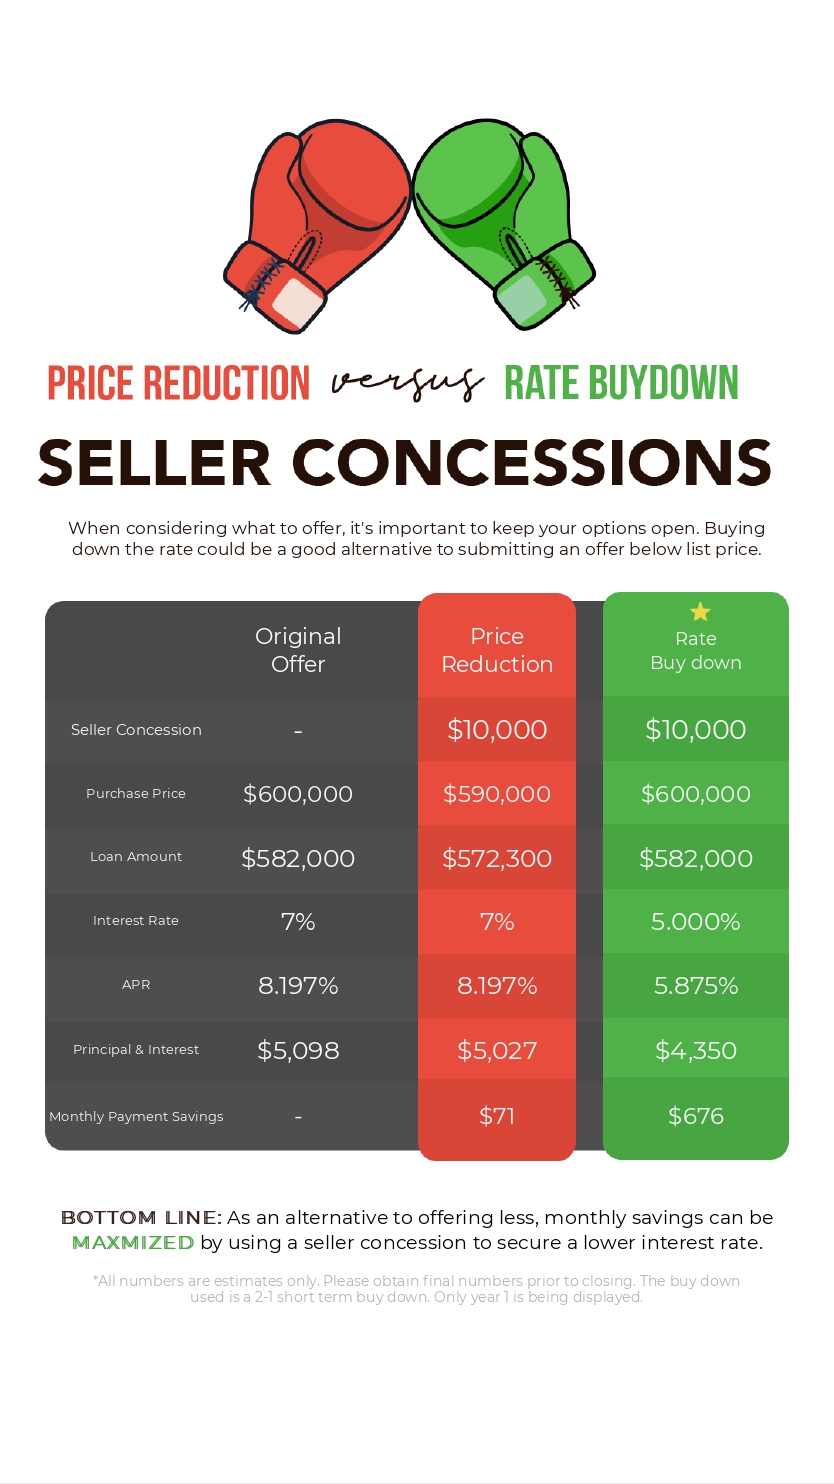 Price Reduction vs Rate Buy Down!?!?!